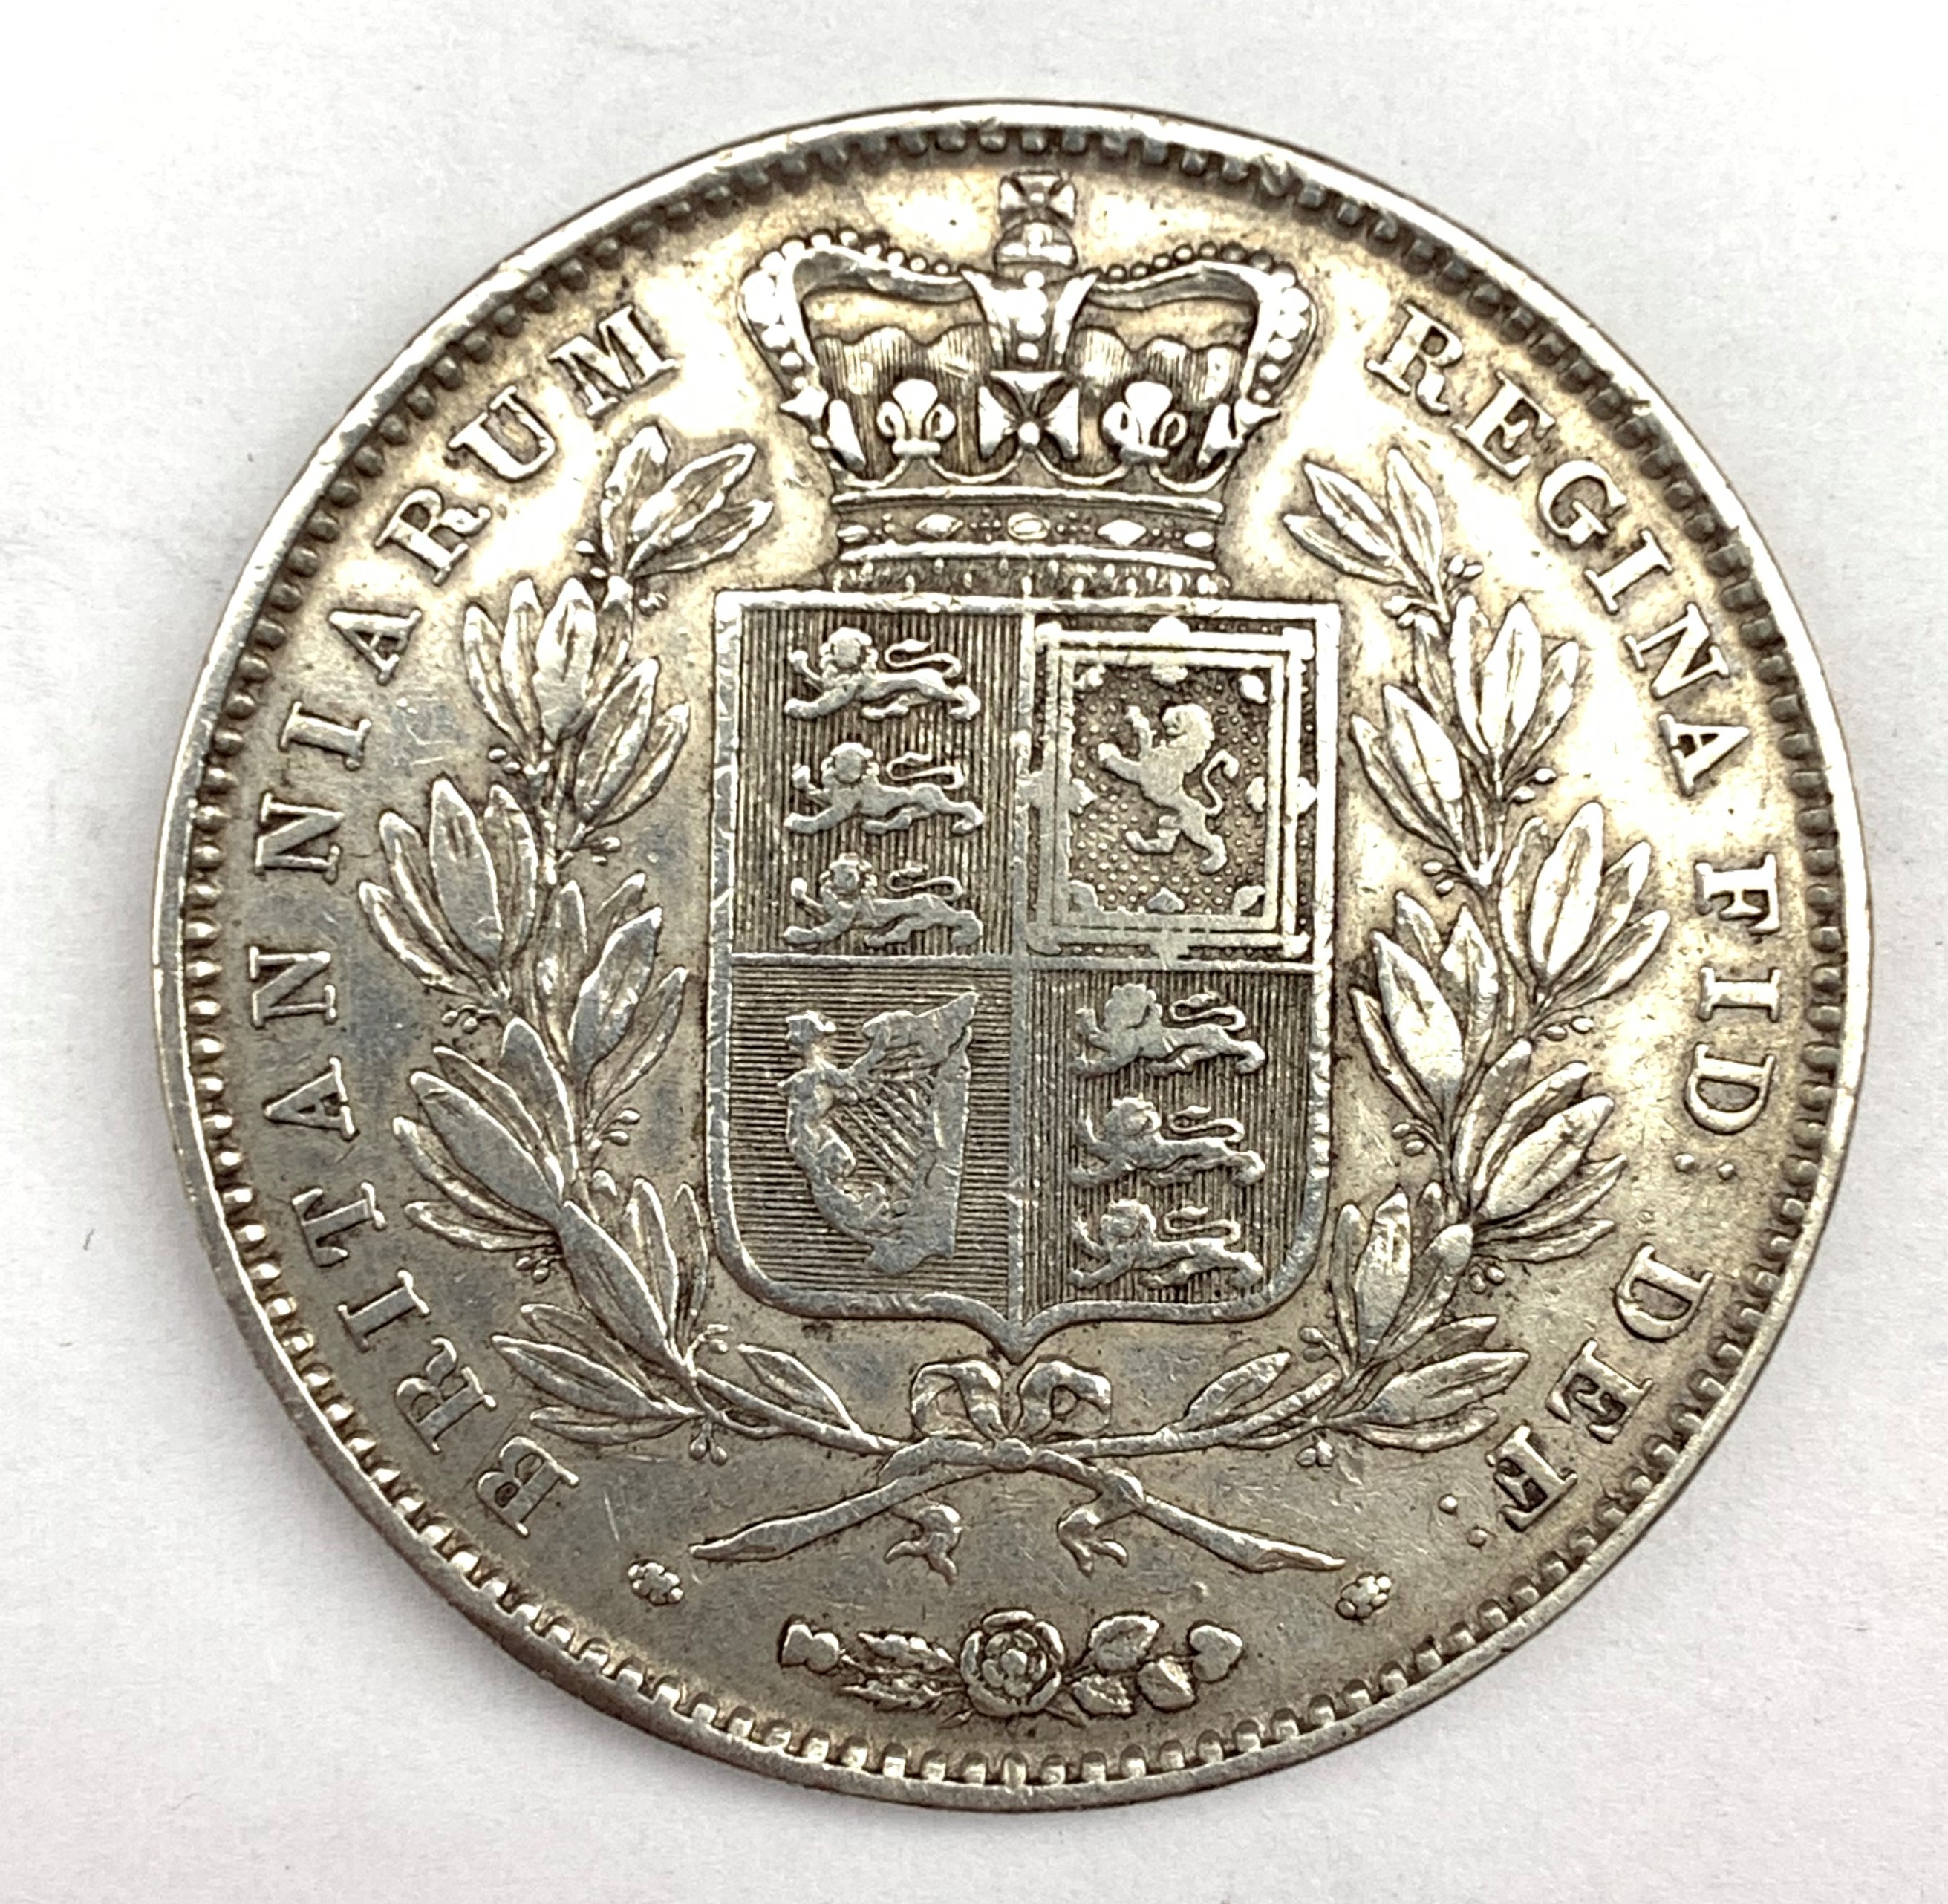 Queen Victoria 1845 crown coin - Image 2 of 2